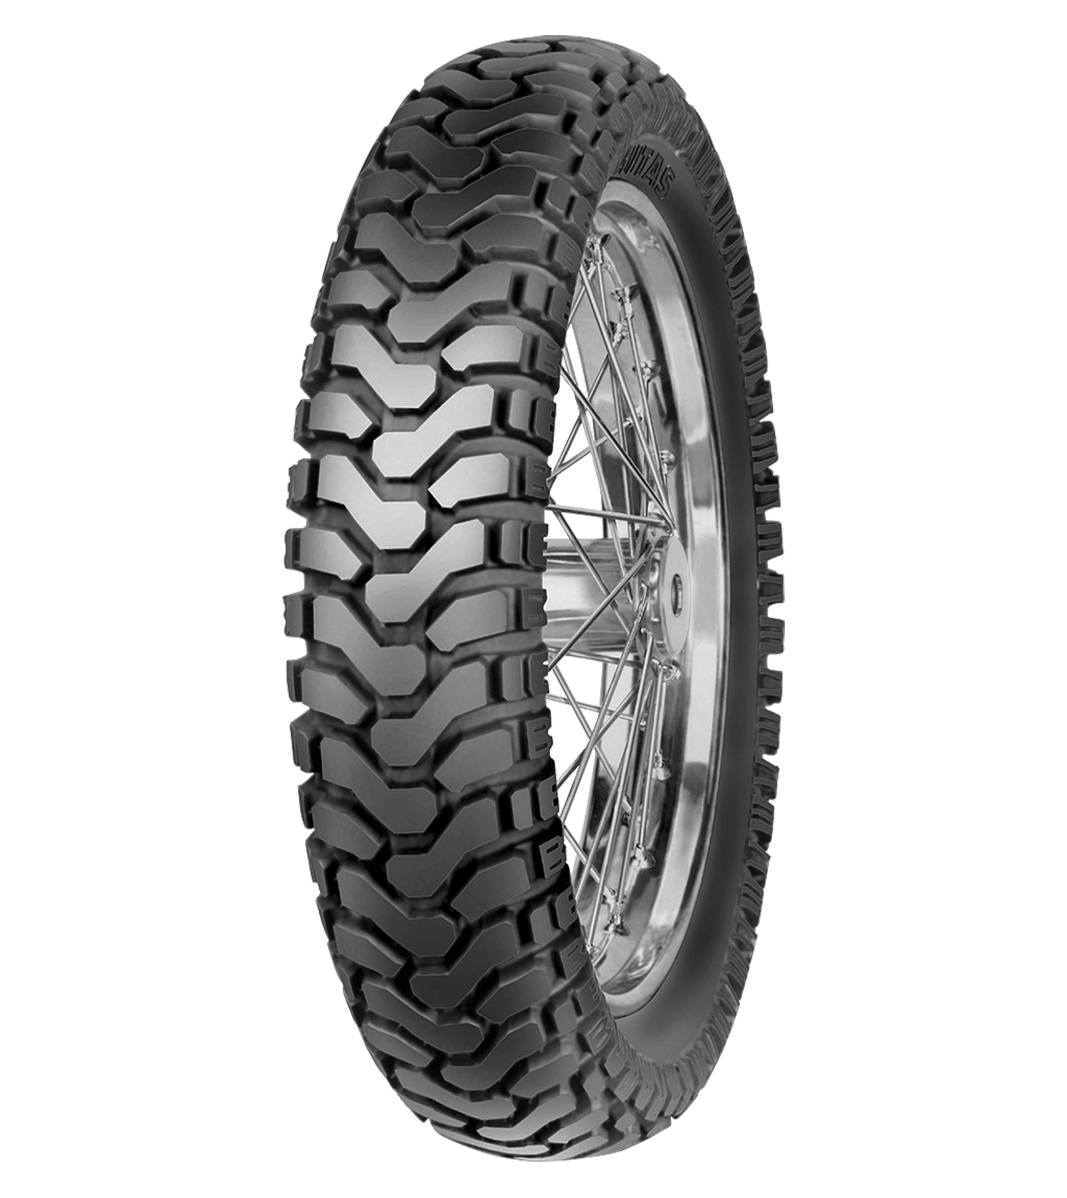 Mitas E-07 ENDURO 140/80-17 Trail OFF Trail 69T No Stripe Tubeless Rear Tire, 224406, 140/80-17, Adventure Touring, E Series, E-07 Enduro, Rear, Trail, Trail OFF, Tires - Imported and distributed in North & South America by Lindeco Genuine Powersports - Premier Powersports Equipment and Accessories for Motorcycle Enthusiasts, Professional Riders and Dealers.